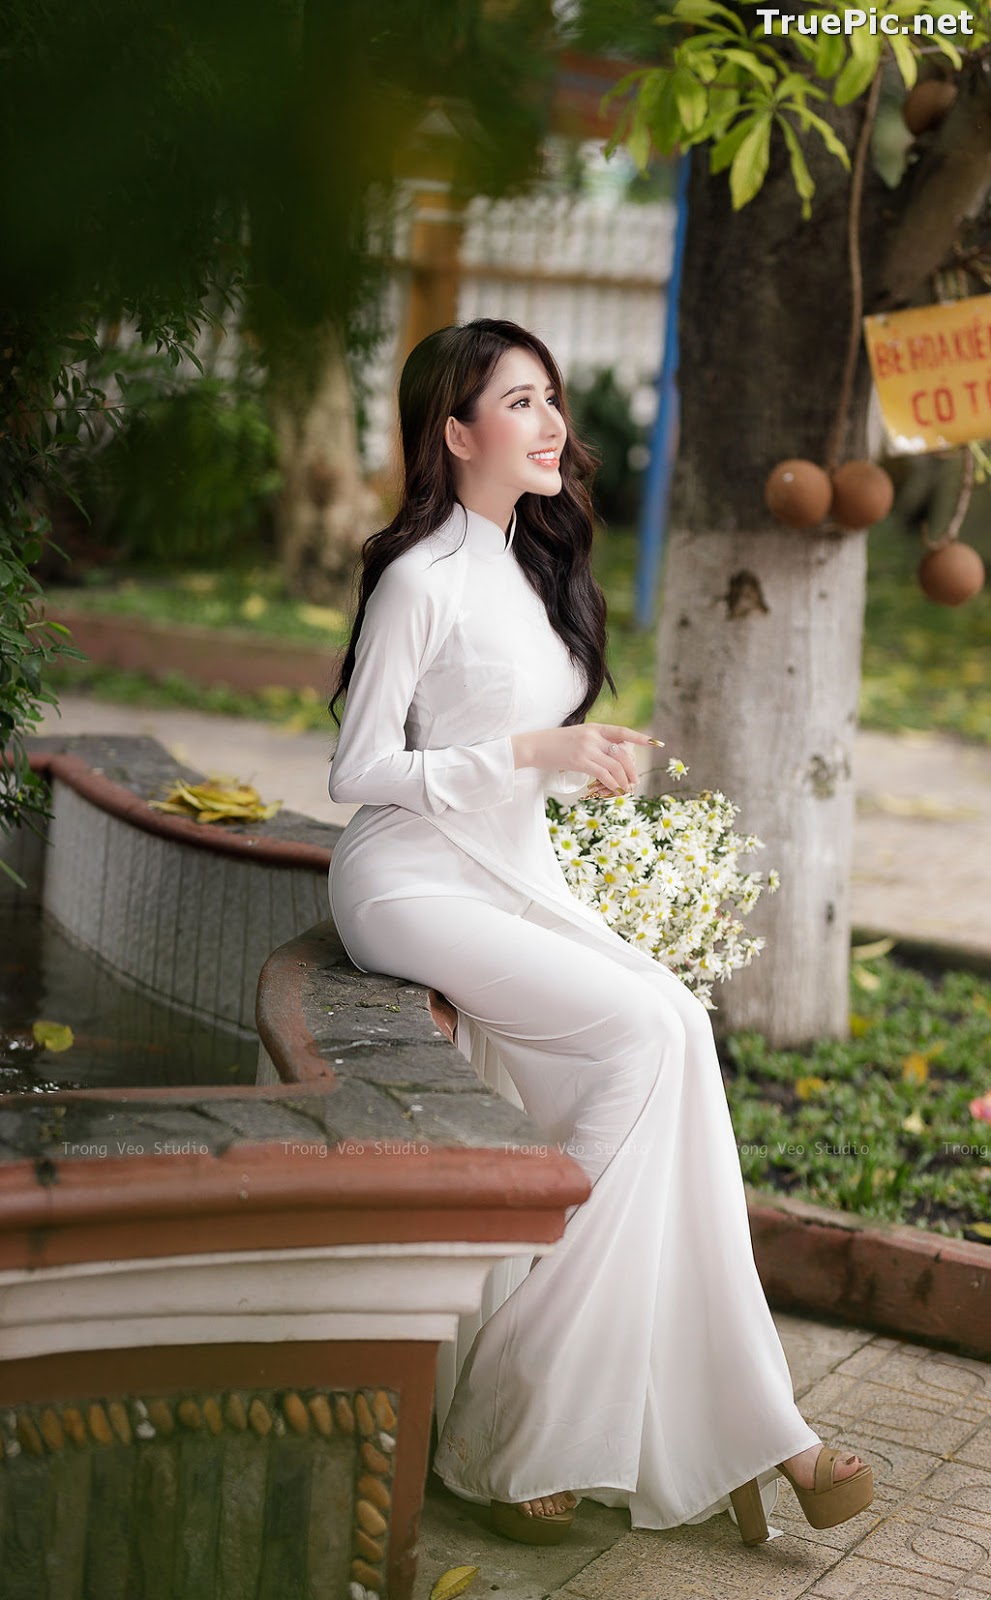 Image The Beauty of Vietnamese Girls with Traditional Dress (Ao Dai) #1 - TruePic.net - Picture-16